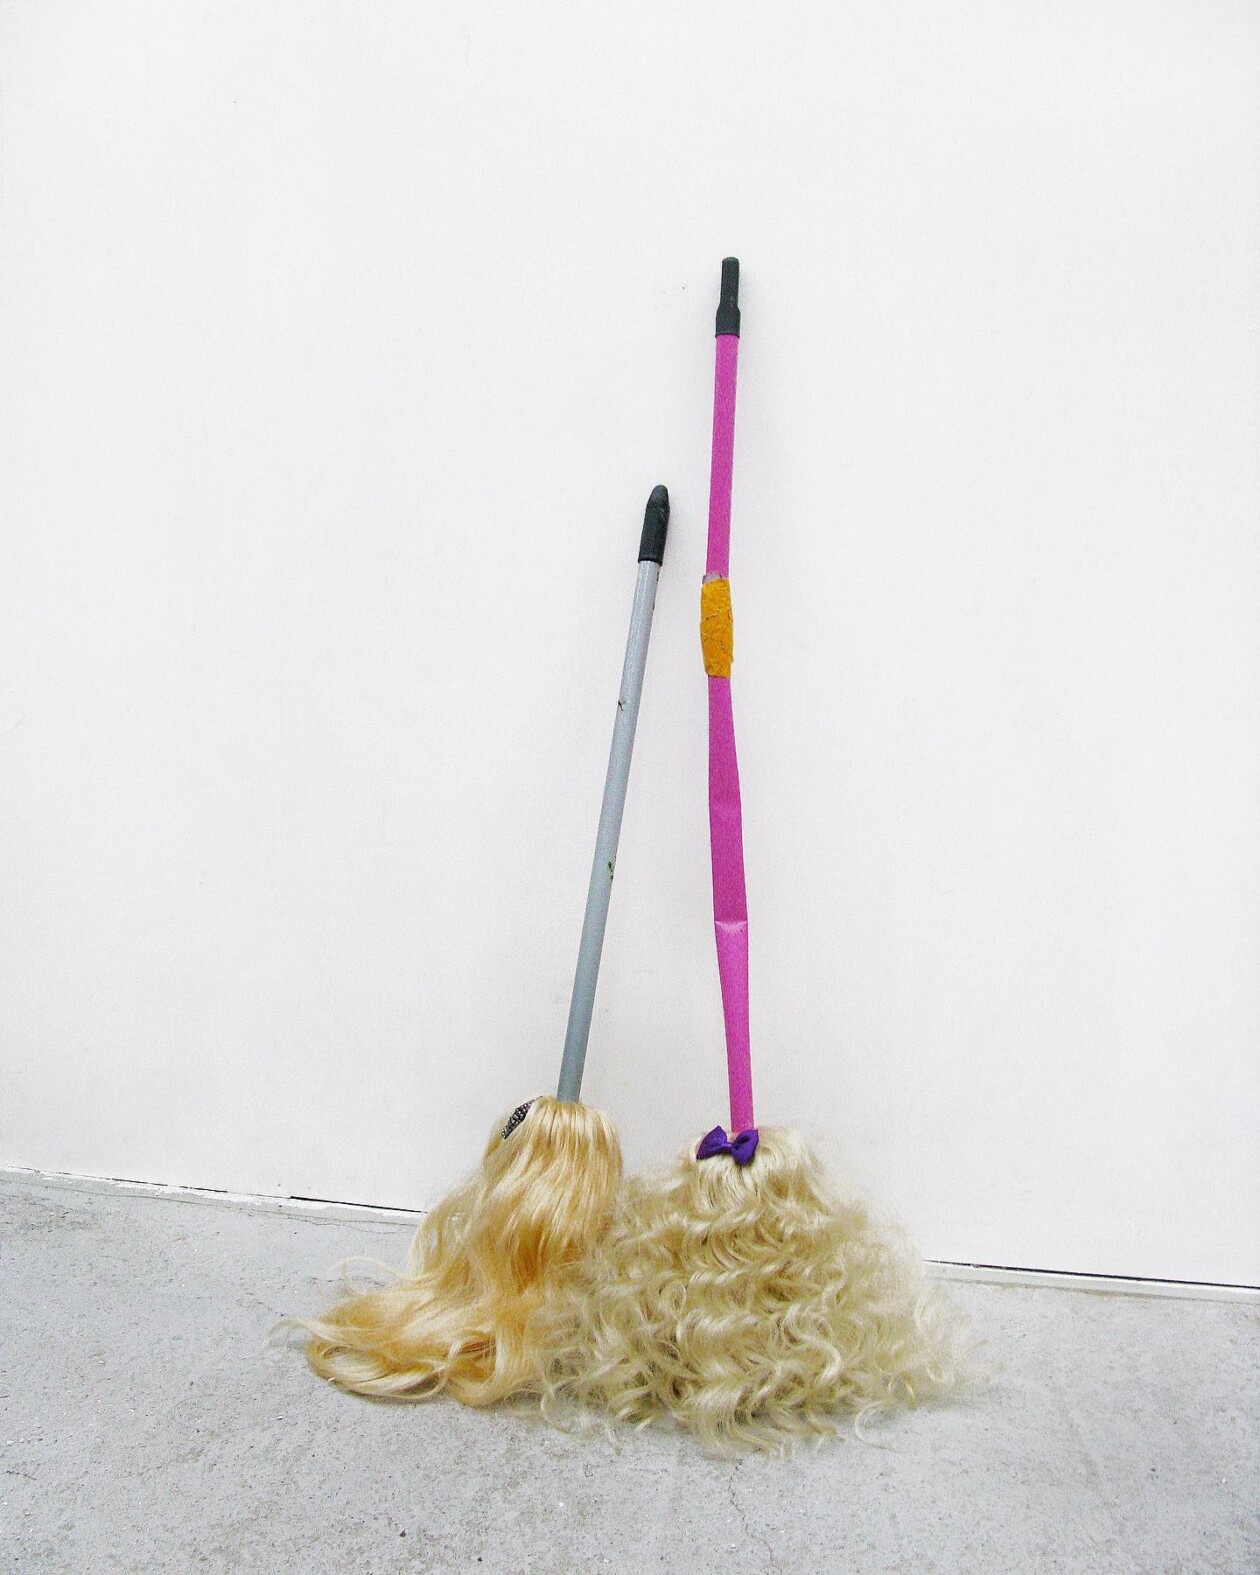 After The Waves (the Waifs) Surreal Sculptures Of Brooms With Human Hairs By Vincent Olinet (5)